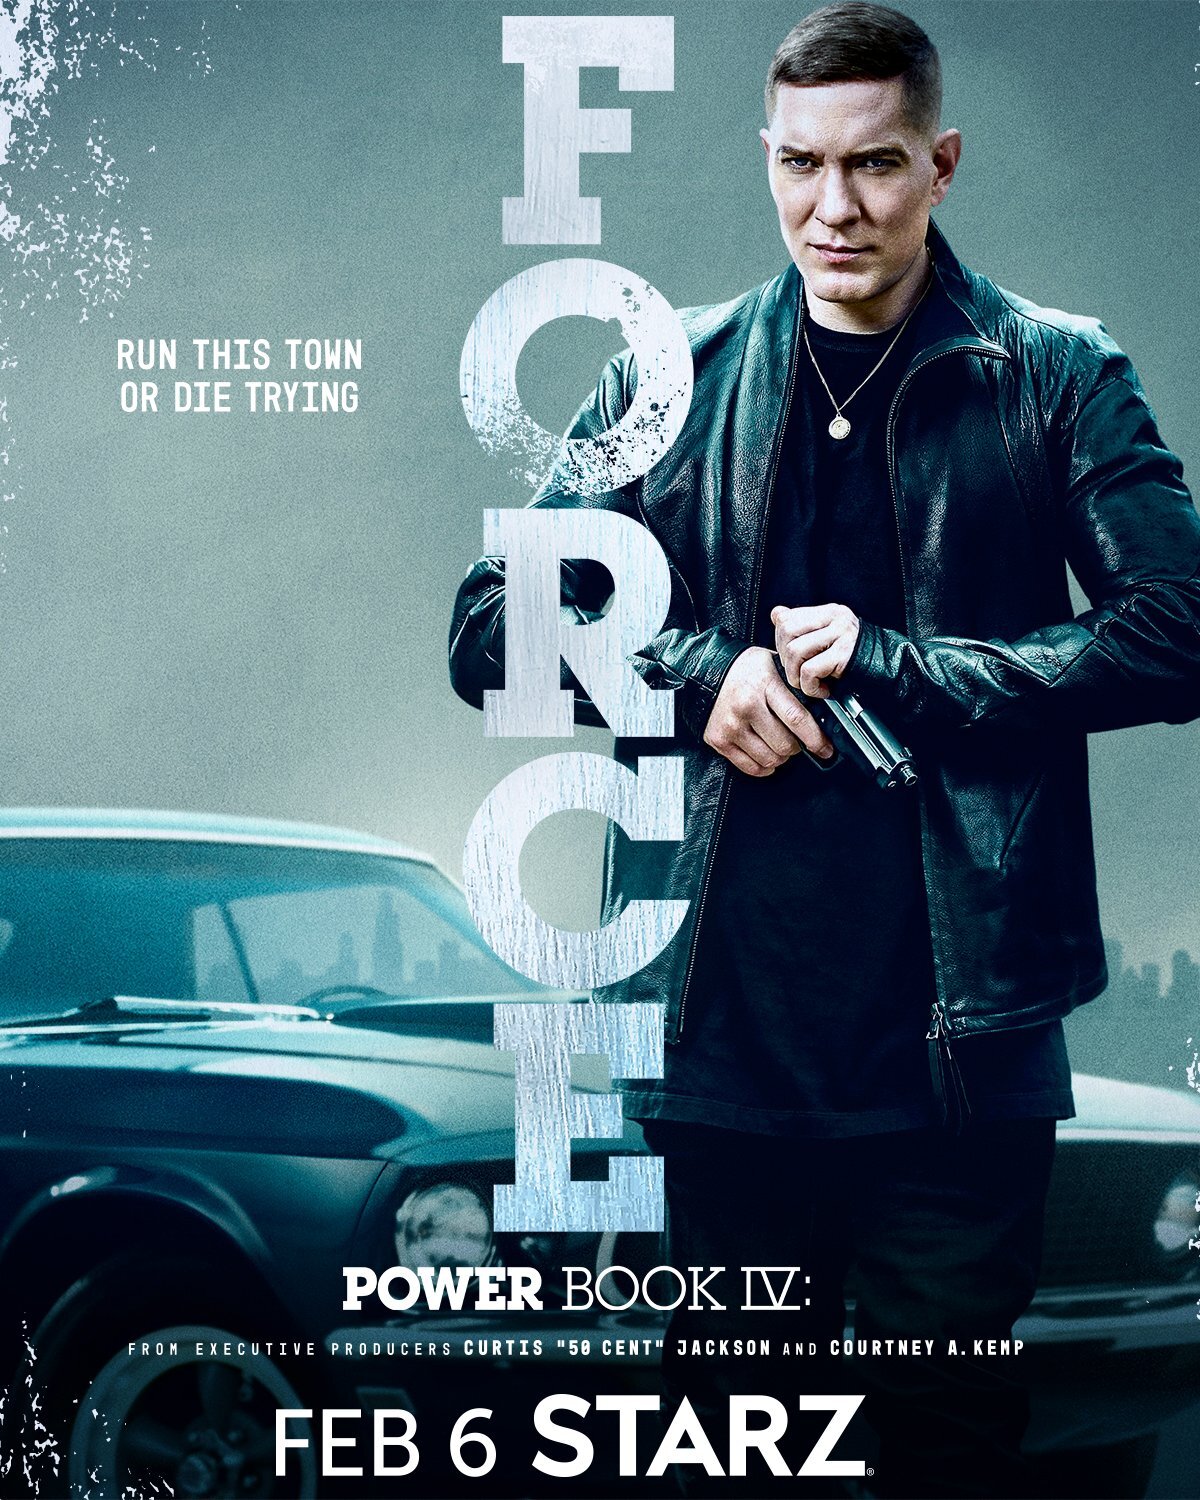 New Clip From Starz Original Series 'Power Book IV: Force' - Season 1, Episode 5